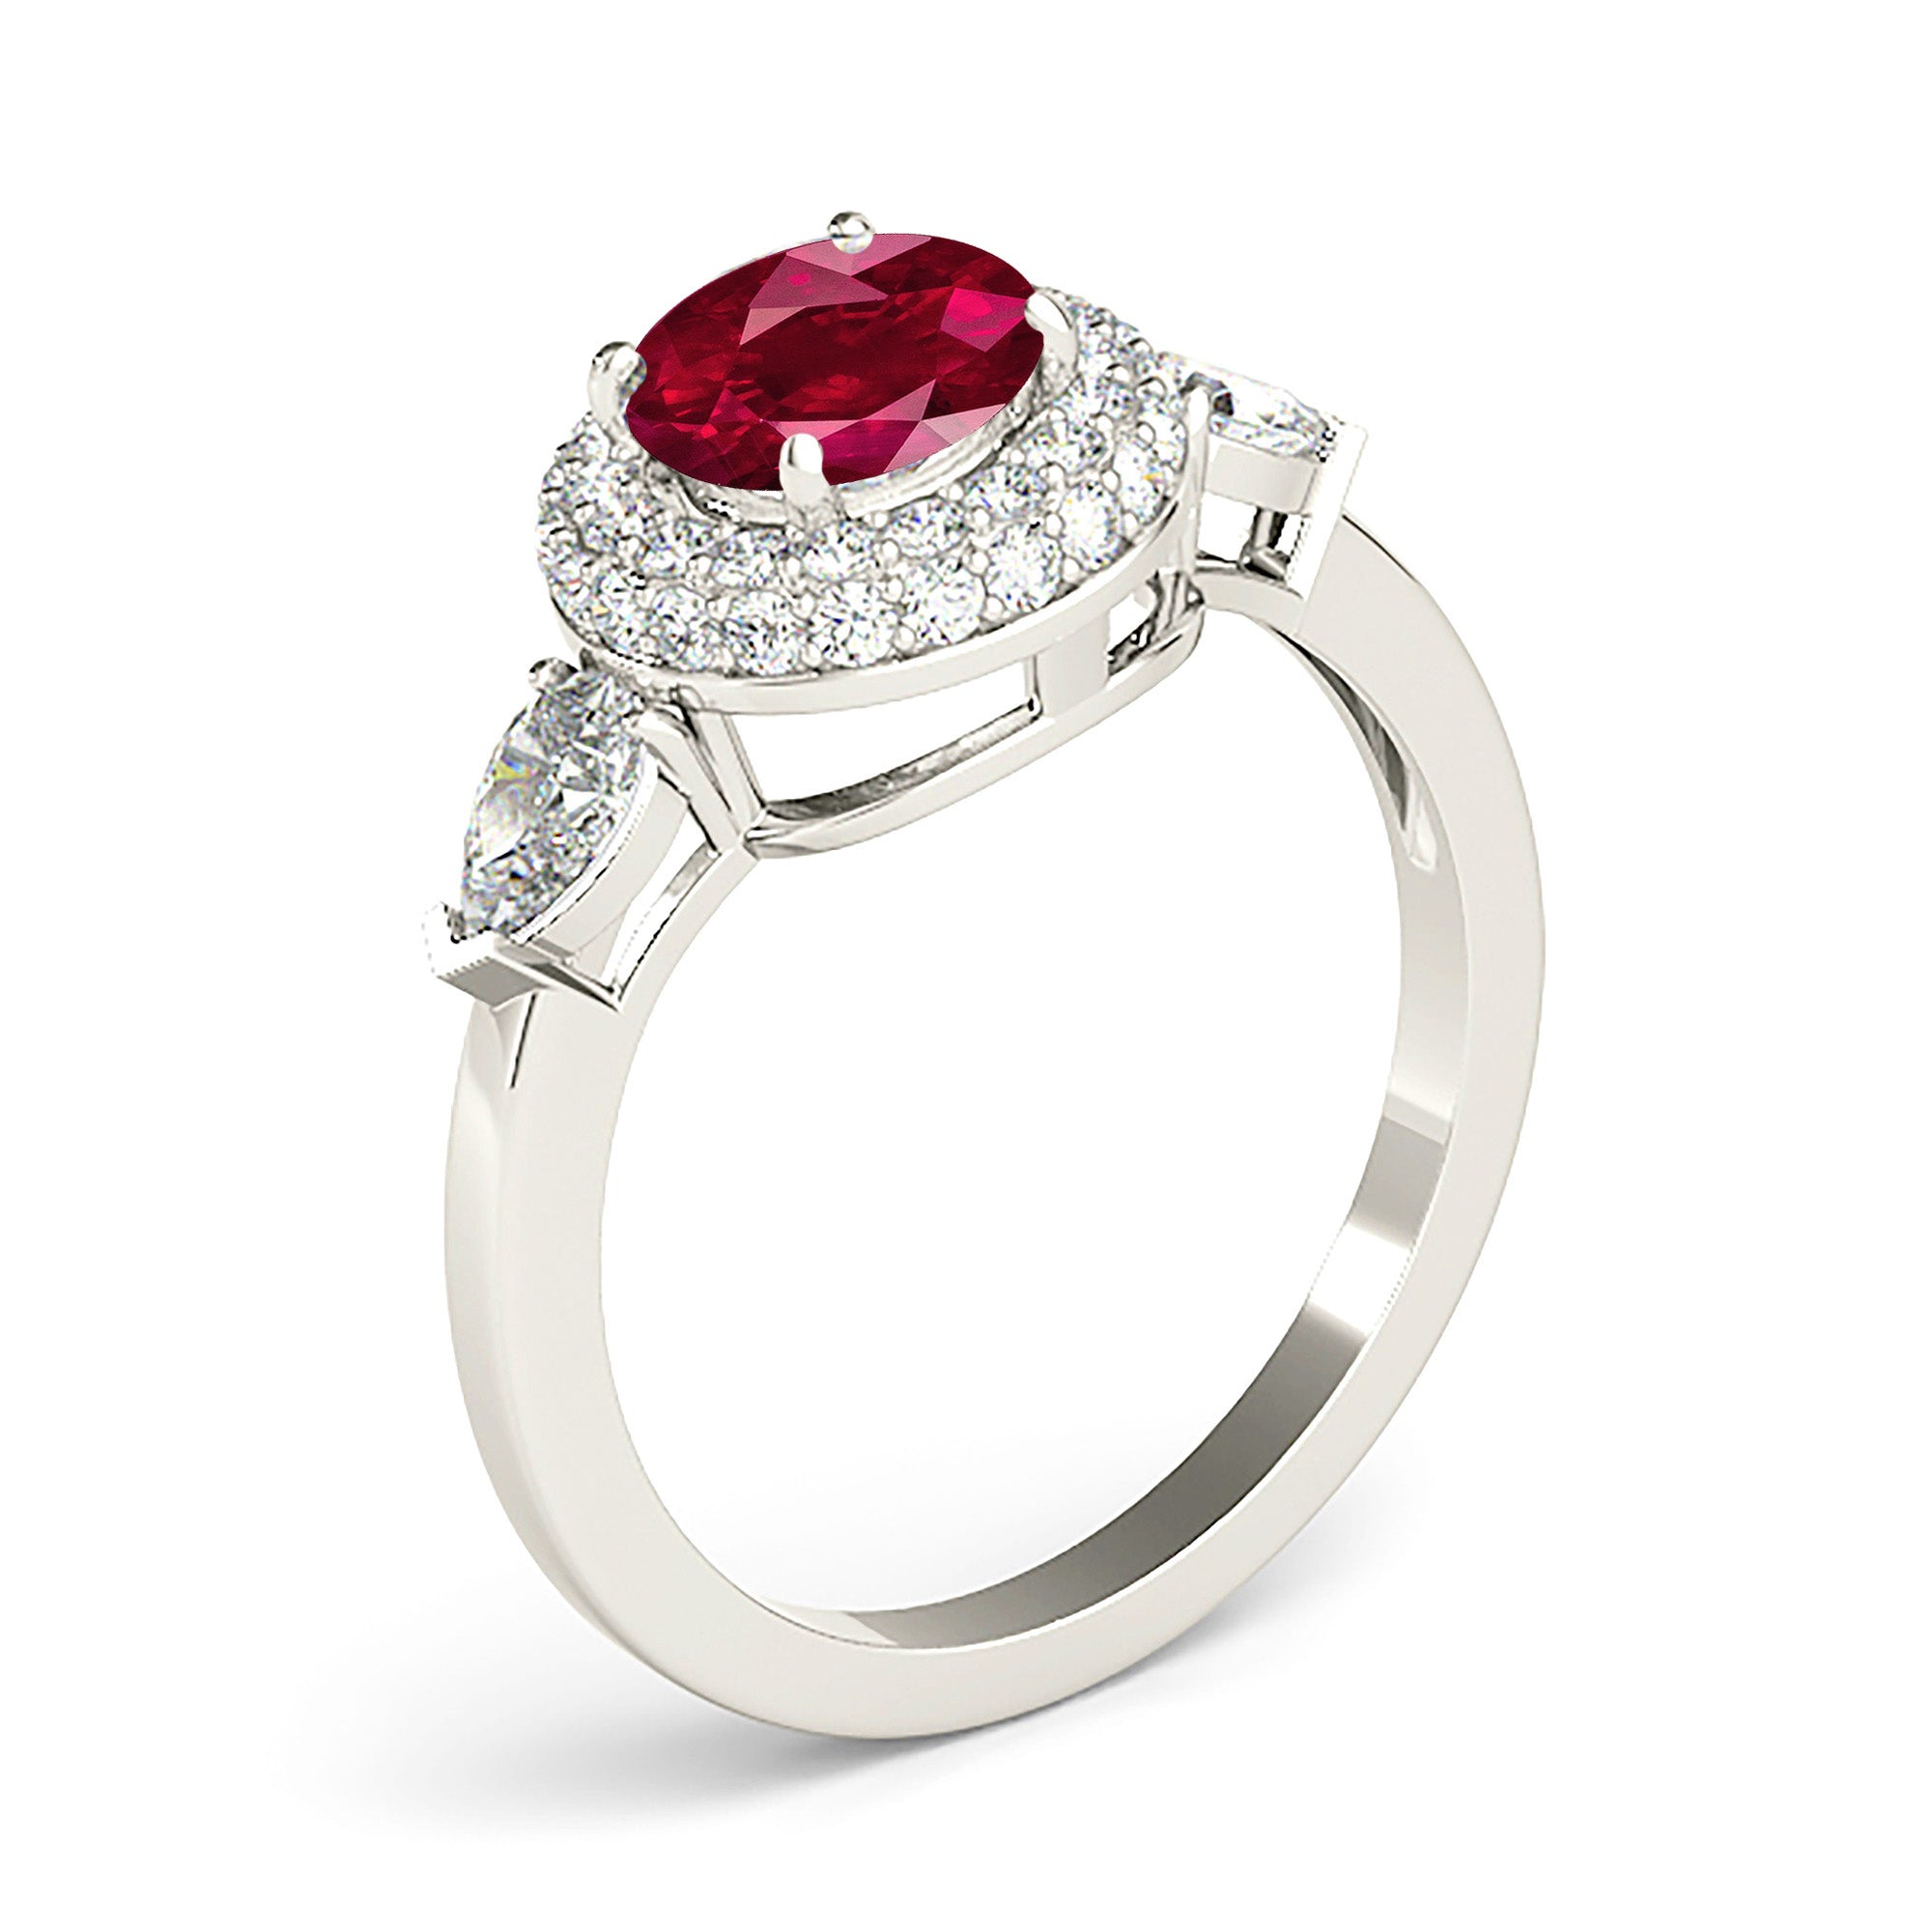 1.35 ct. Genuine Ruby Ring With 0.90 ctw. Diamond Halo And Side Accent Pear Shape Diamonds-in 14K/18K White, Yellow, Rose Gold and Platinum - Christmas Jewelry Gift -VIRABYANI